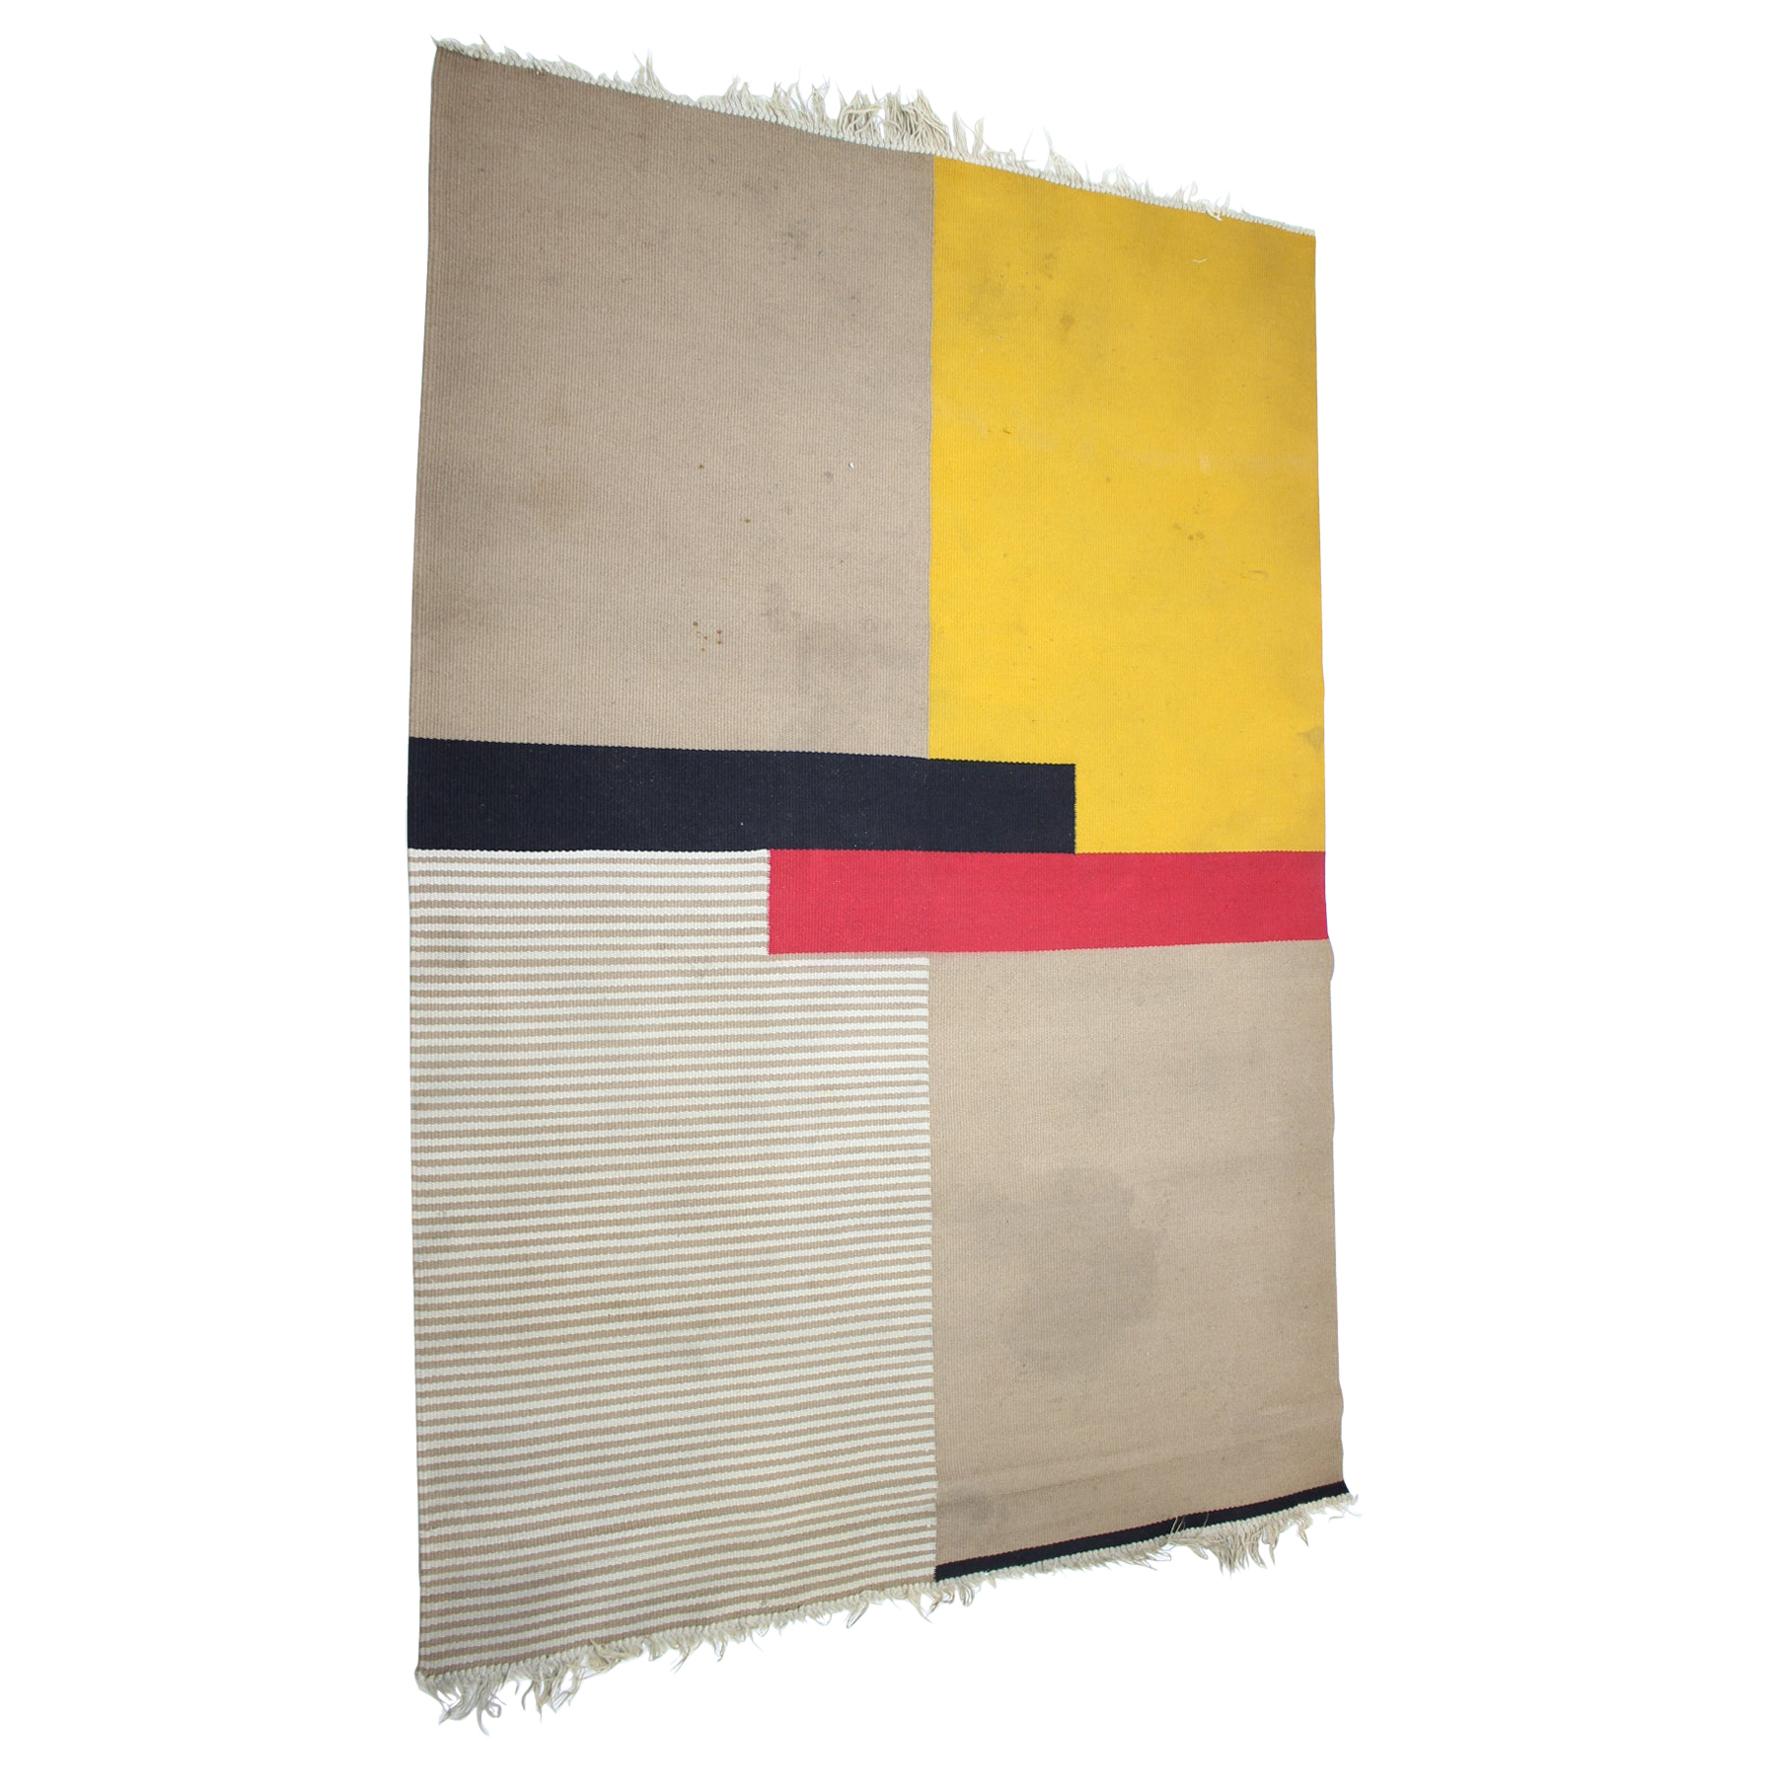 Pair of Big Midcentury Design Abstract Geometric Carpets, Rugs, 1950s For Sale